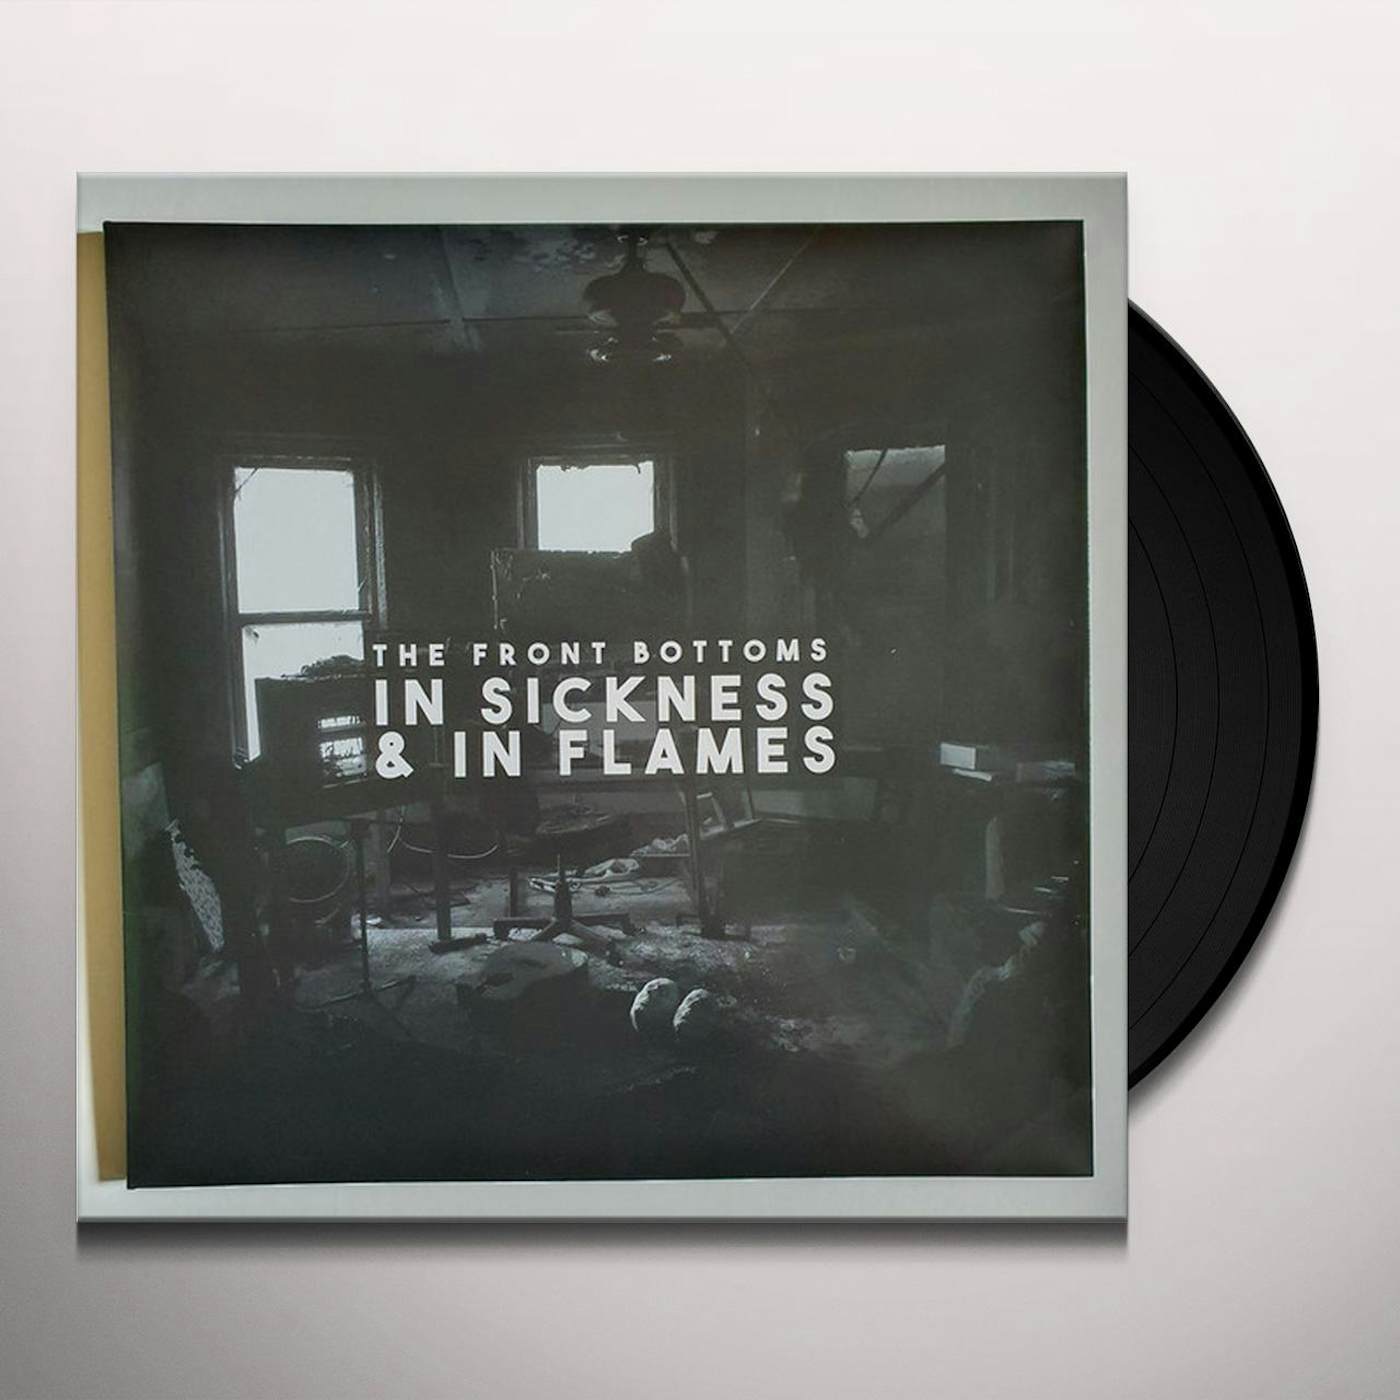 The Front Bottoms In Sickness & In Flames Vinyl Record